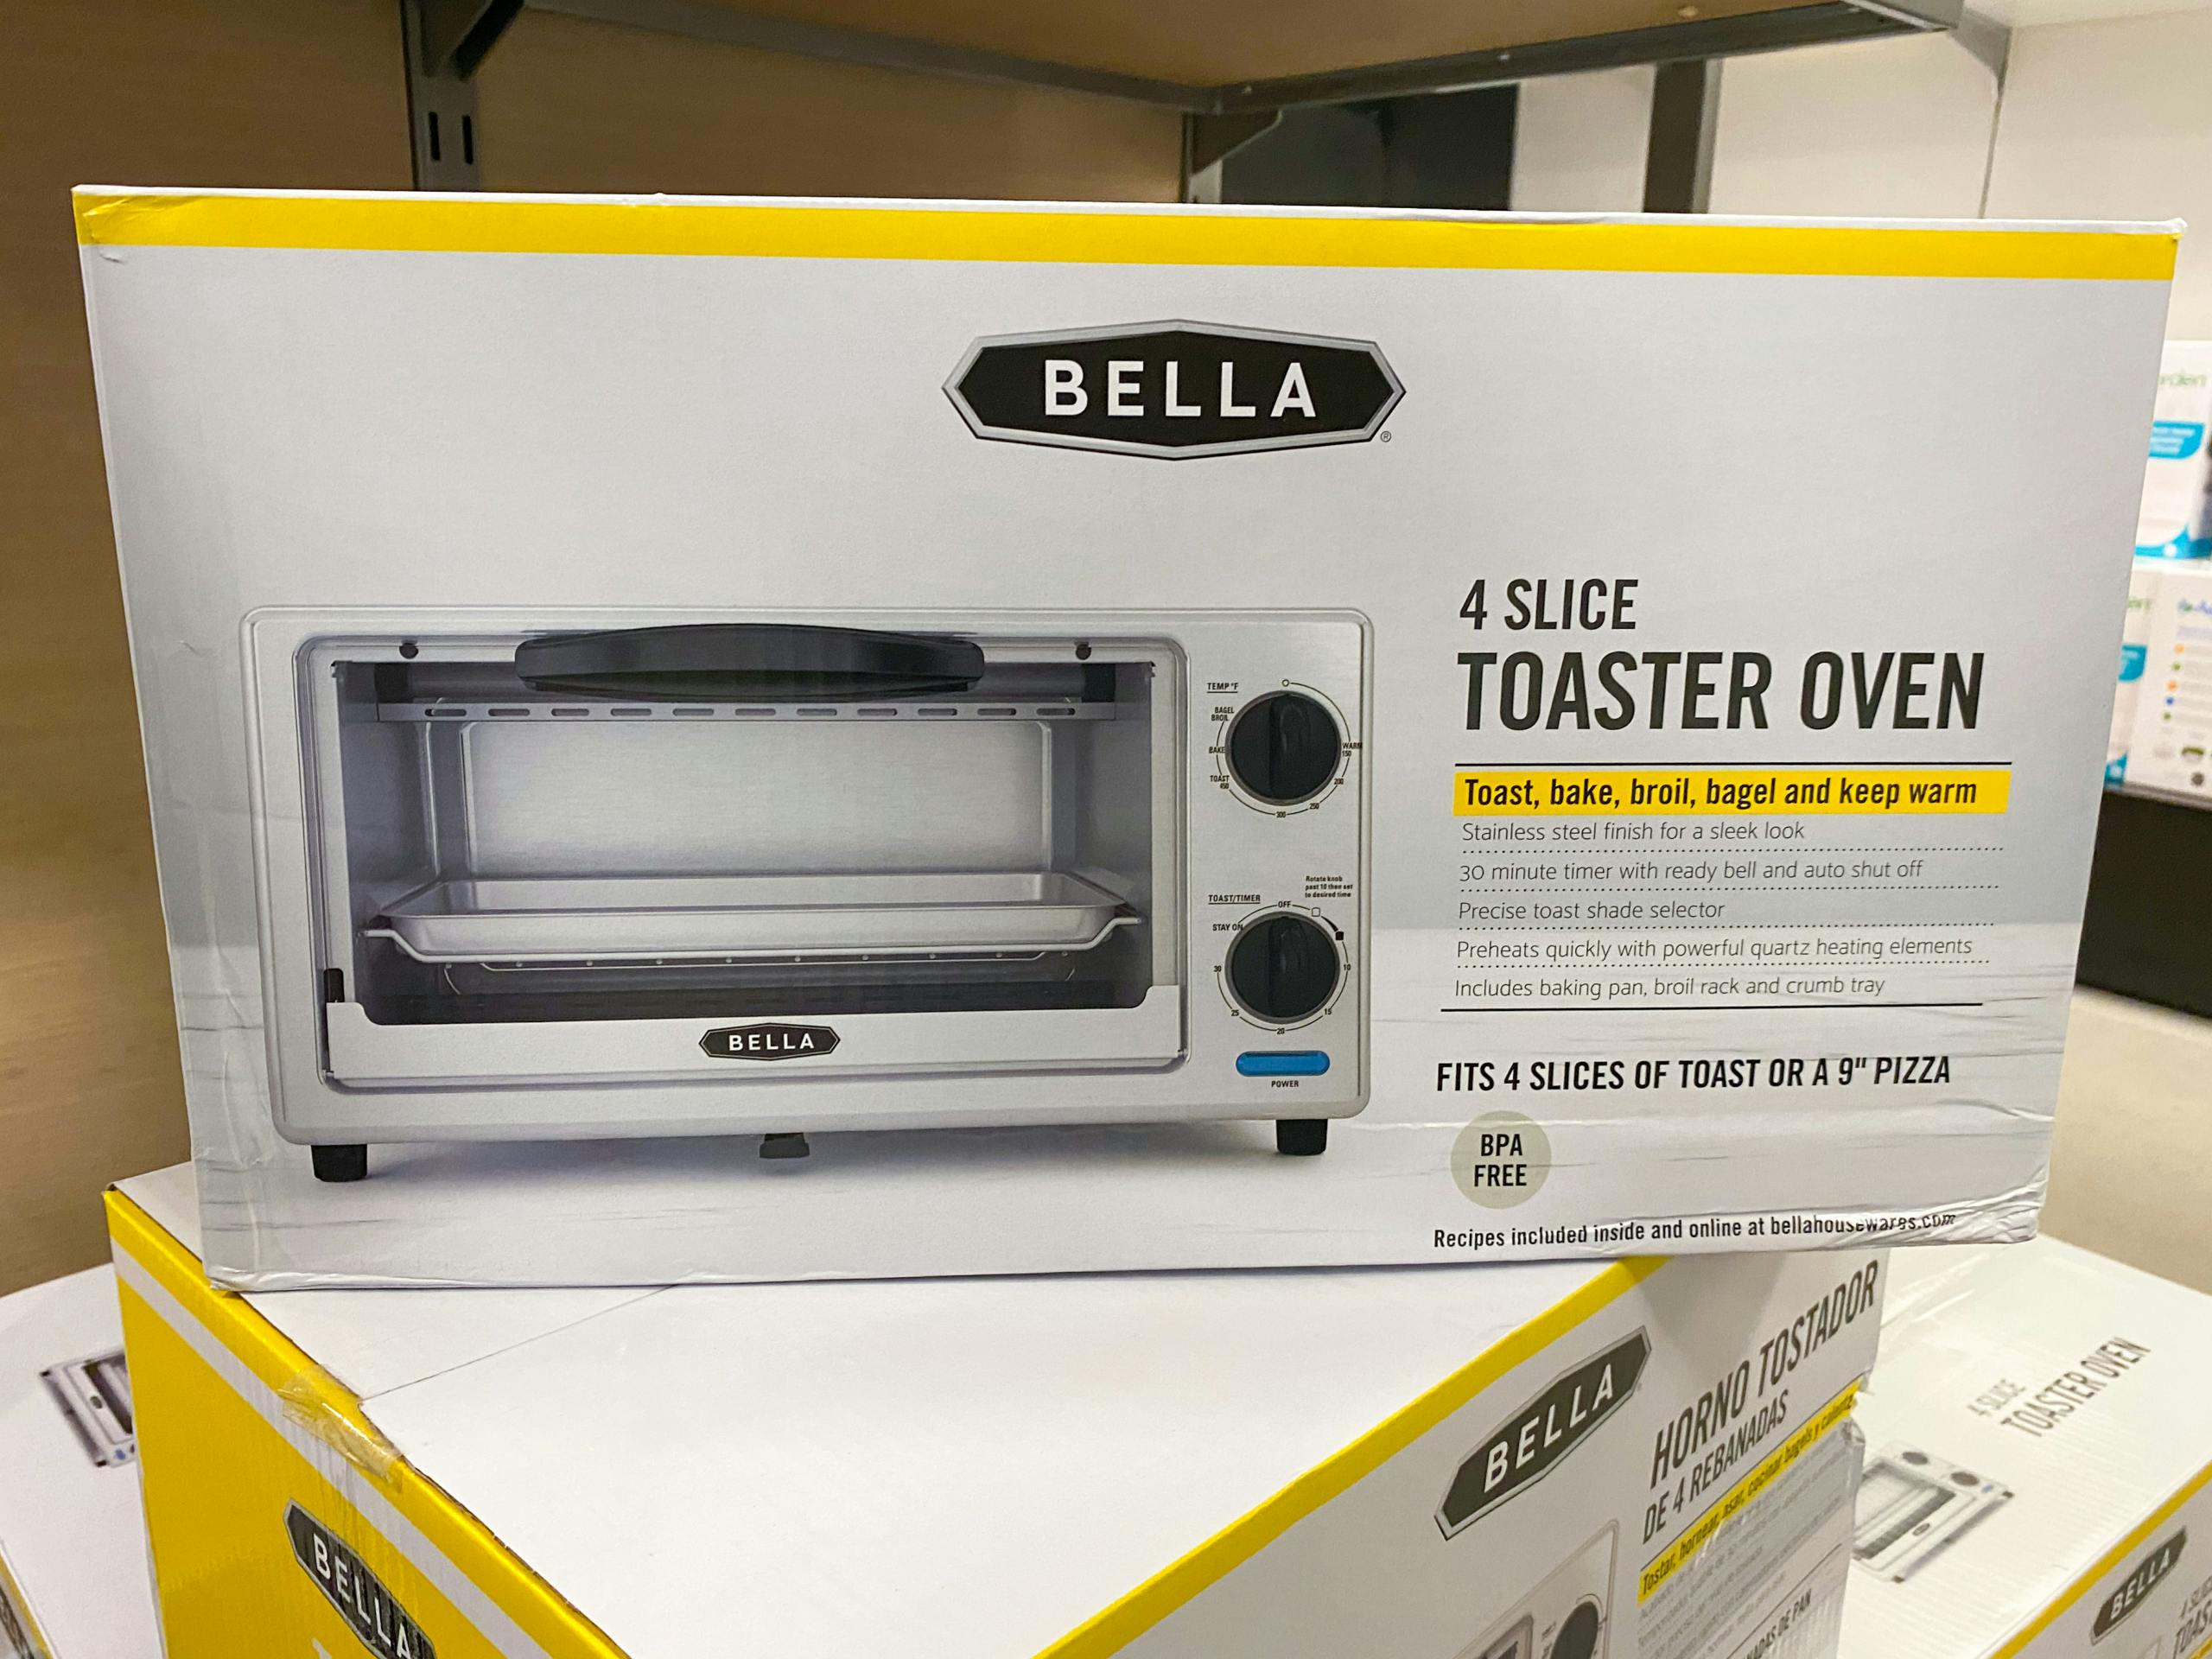 https://content-images.thekrazycouponlady.com/nie44ndm9bqr/2Xc66vZEkp6K3MZMTs4FIu/a7504ff4b3dd322b758b5612af1edba4/macys-bella-toaster-oven-2021-1637352258-1637352258-scaled.jpg